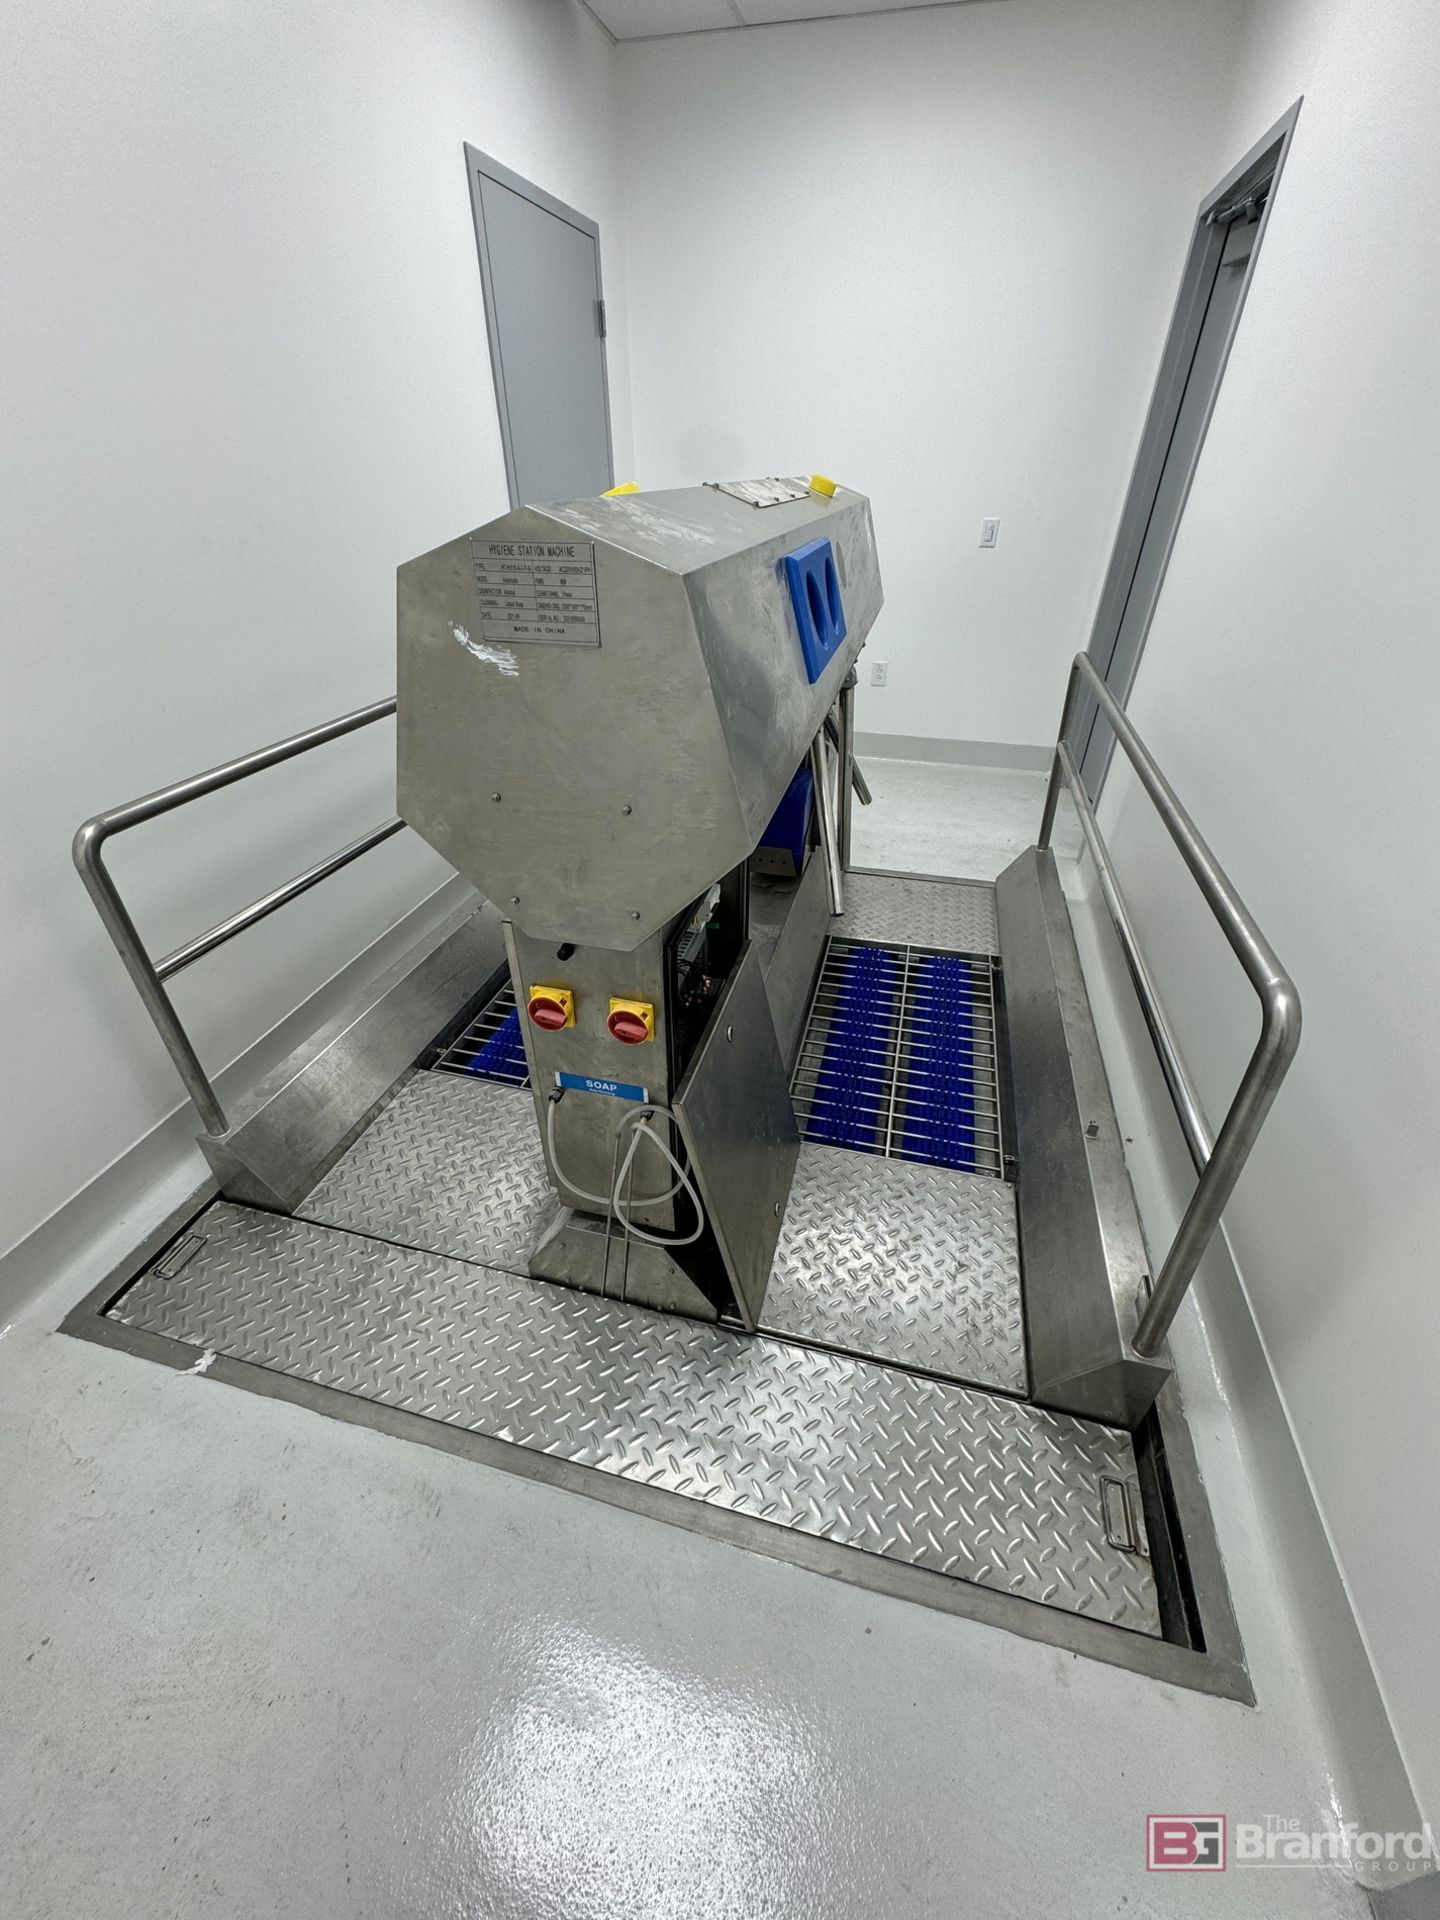 2021 ITEC Frontmatec Hygiene Systems Automatic Walk-Through Sole and Boot Cleaning Machine